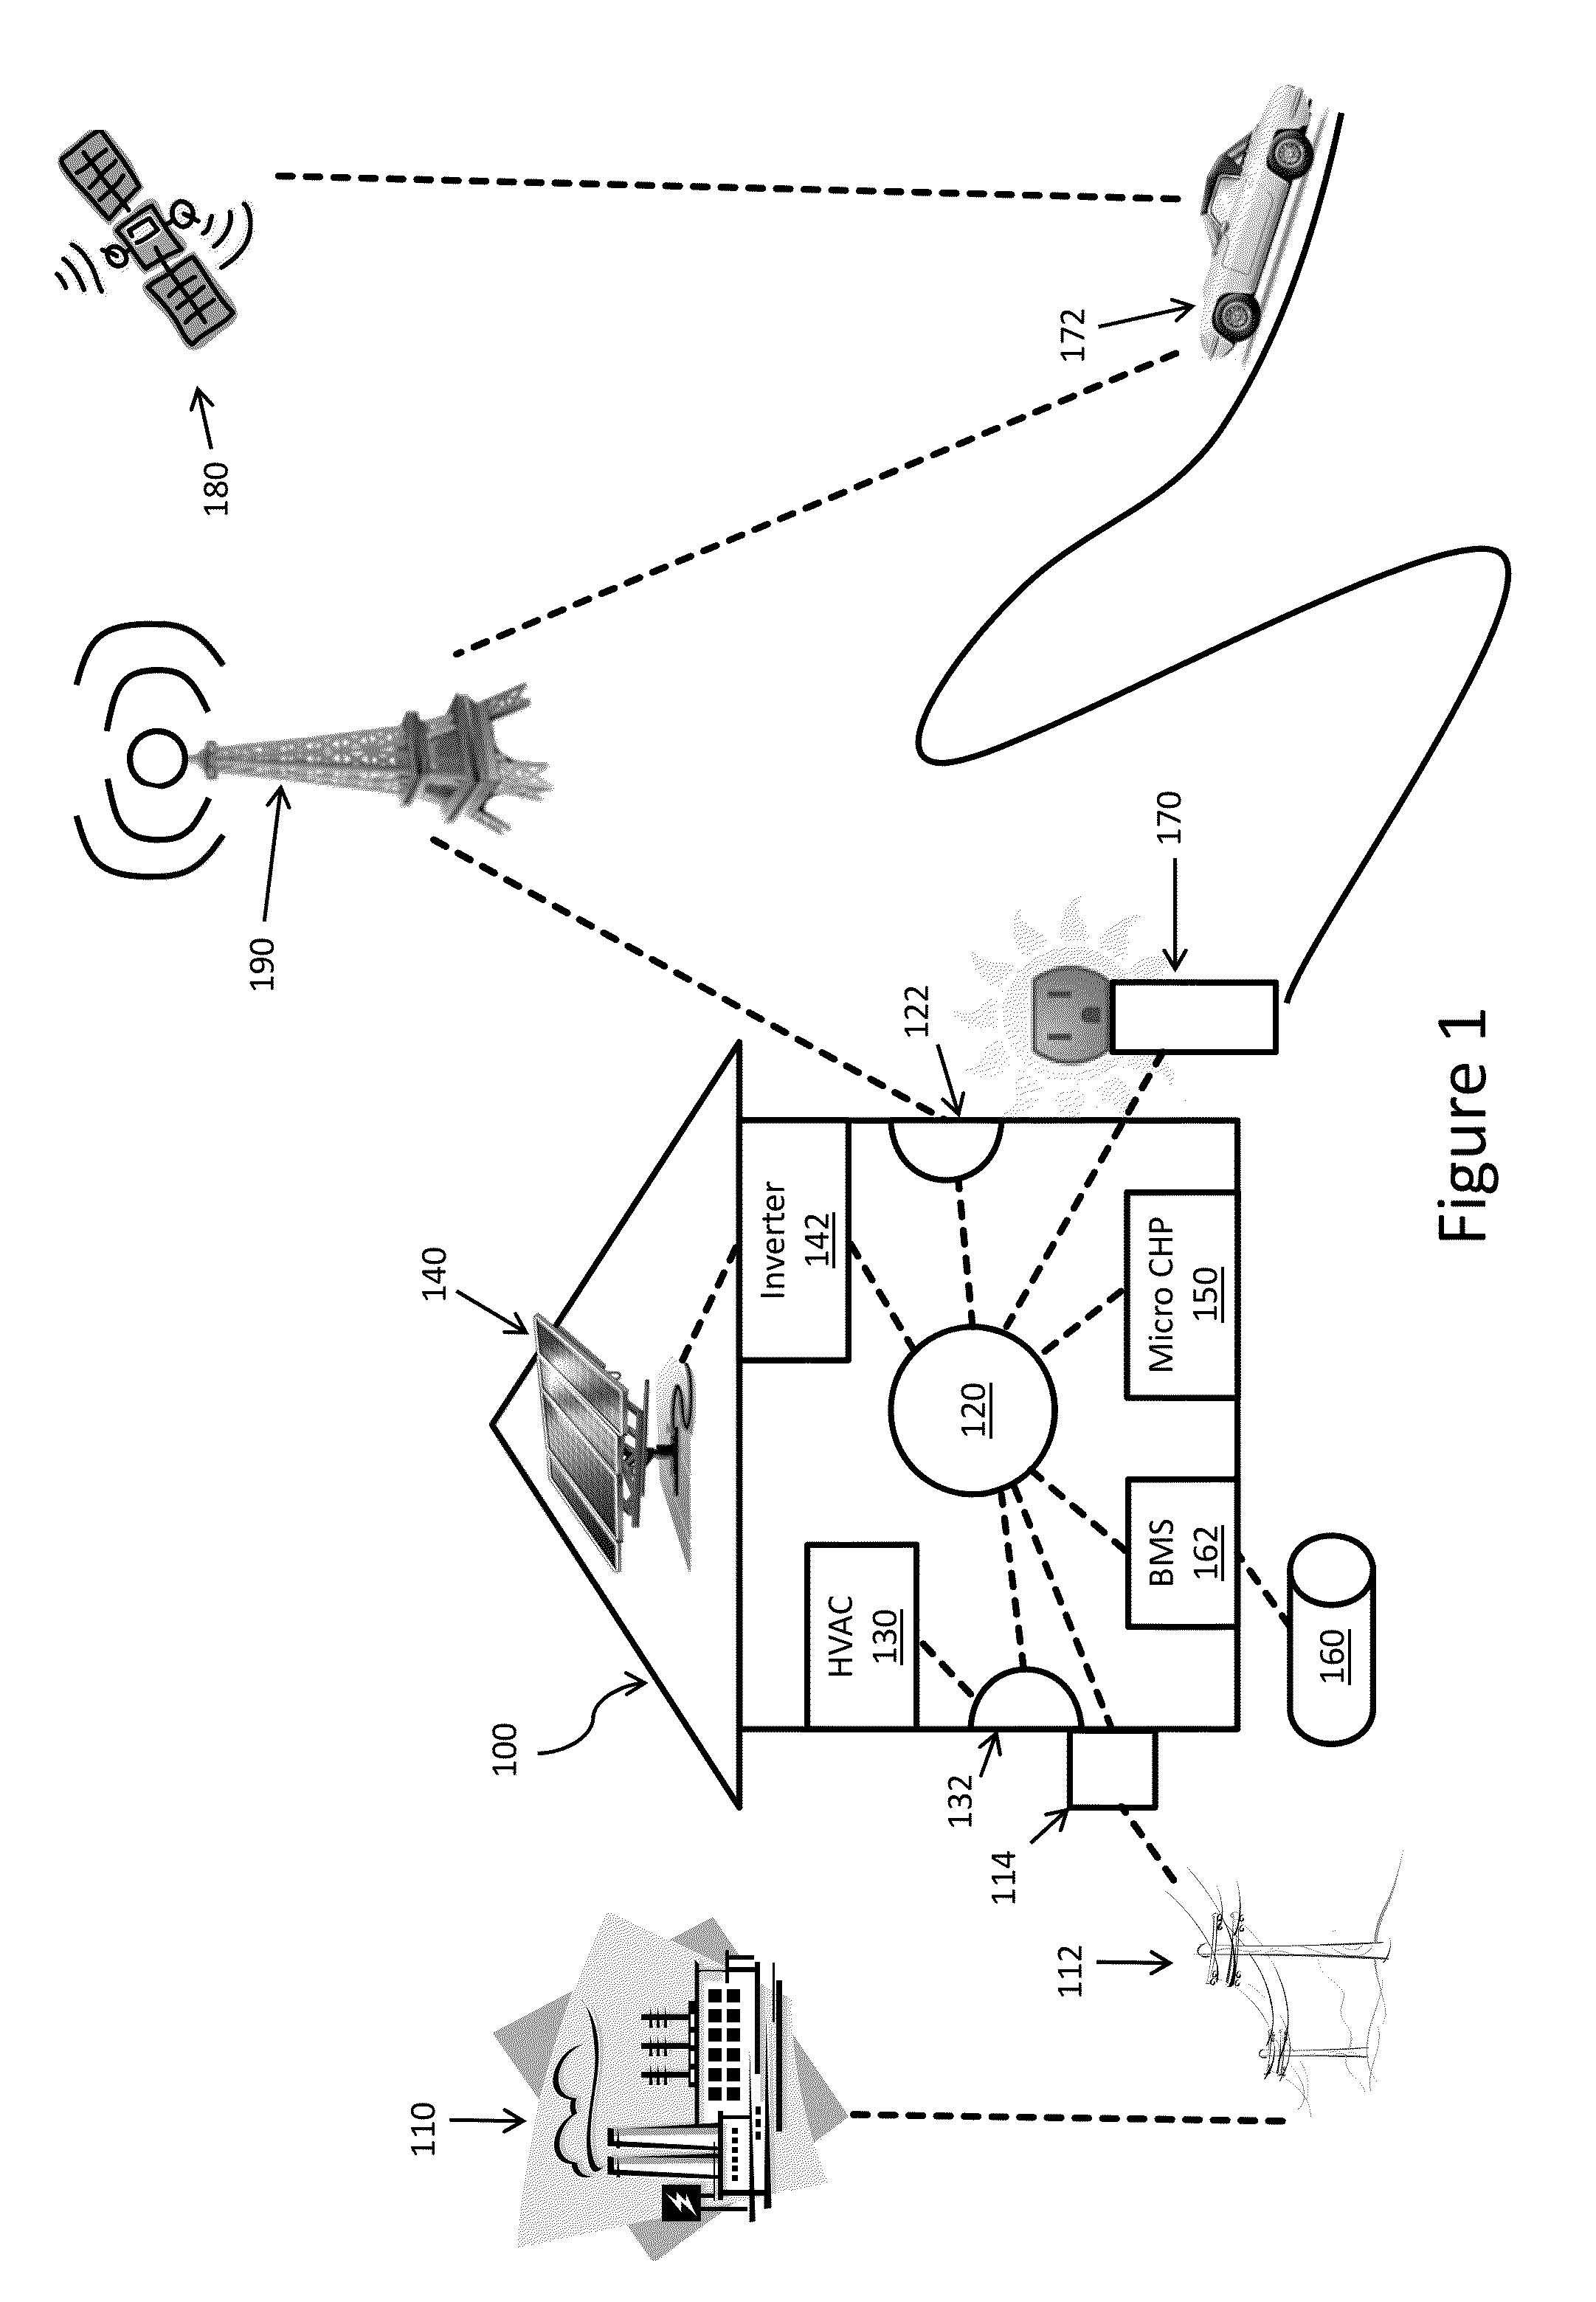 Systems and methods for energy cost optimization